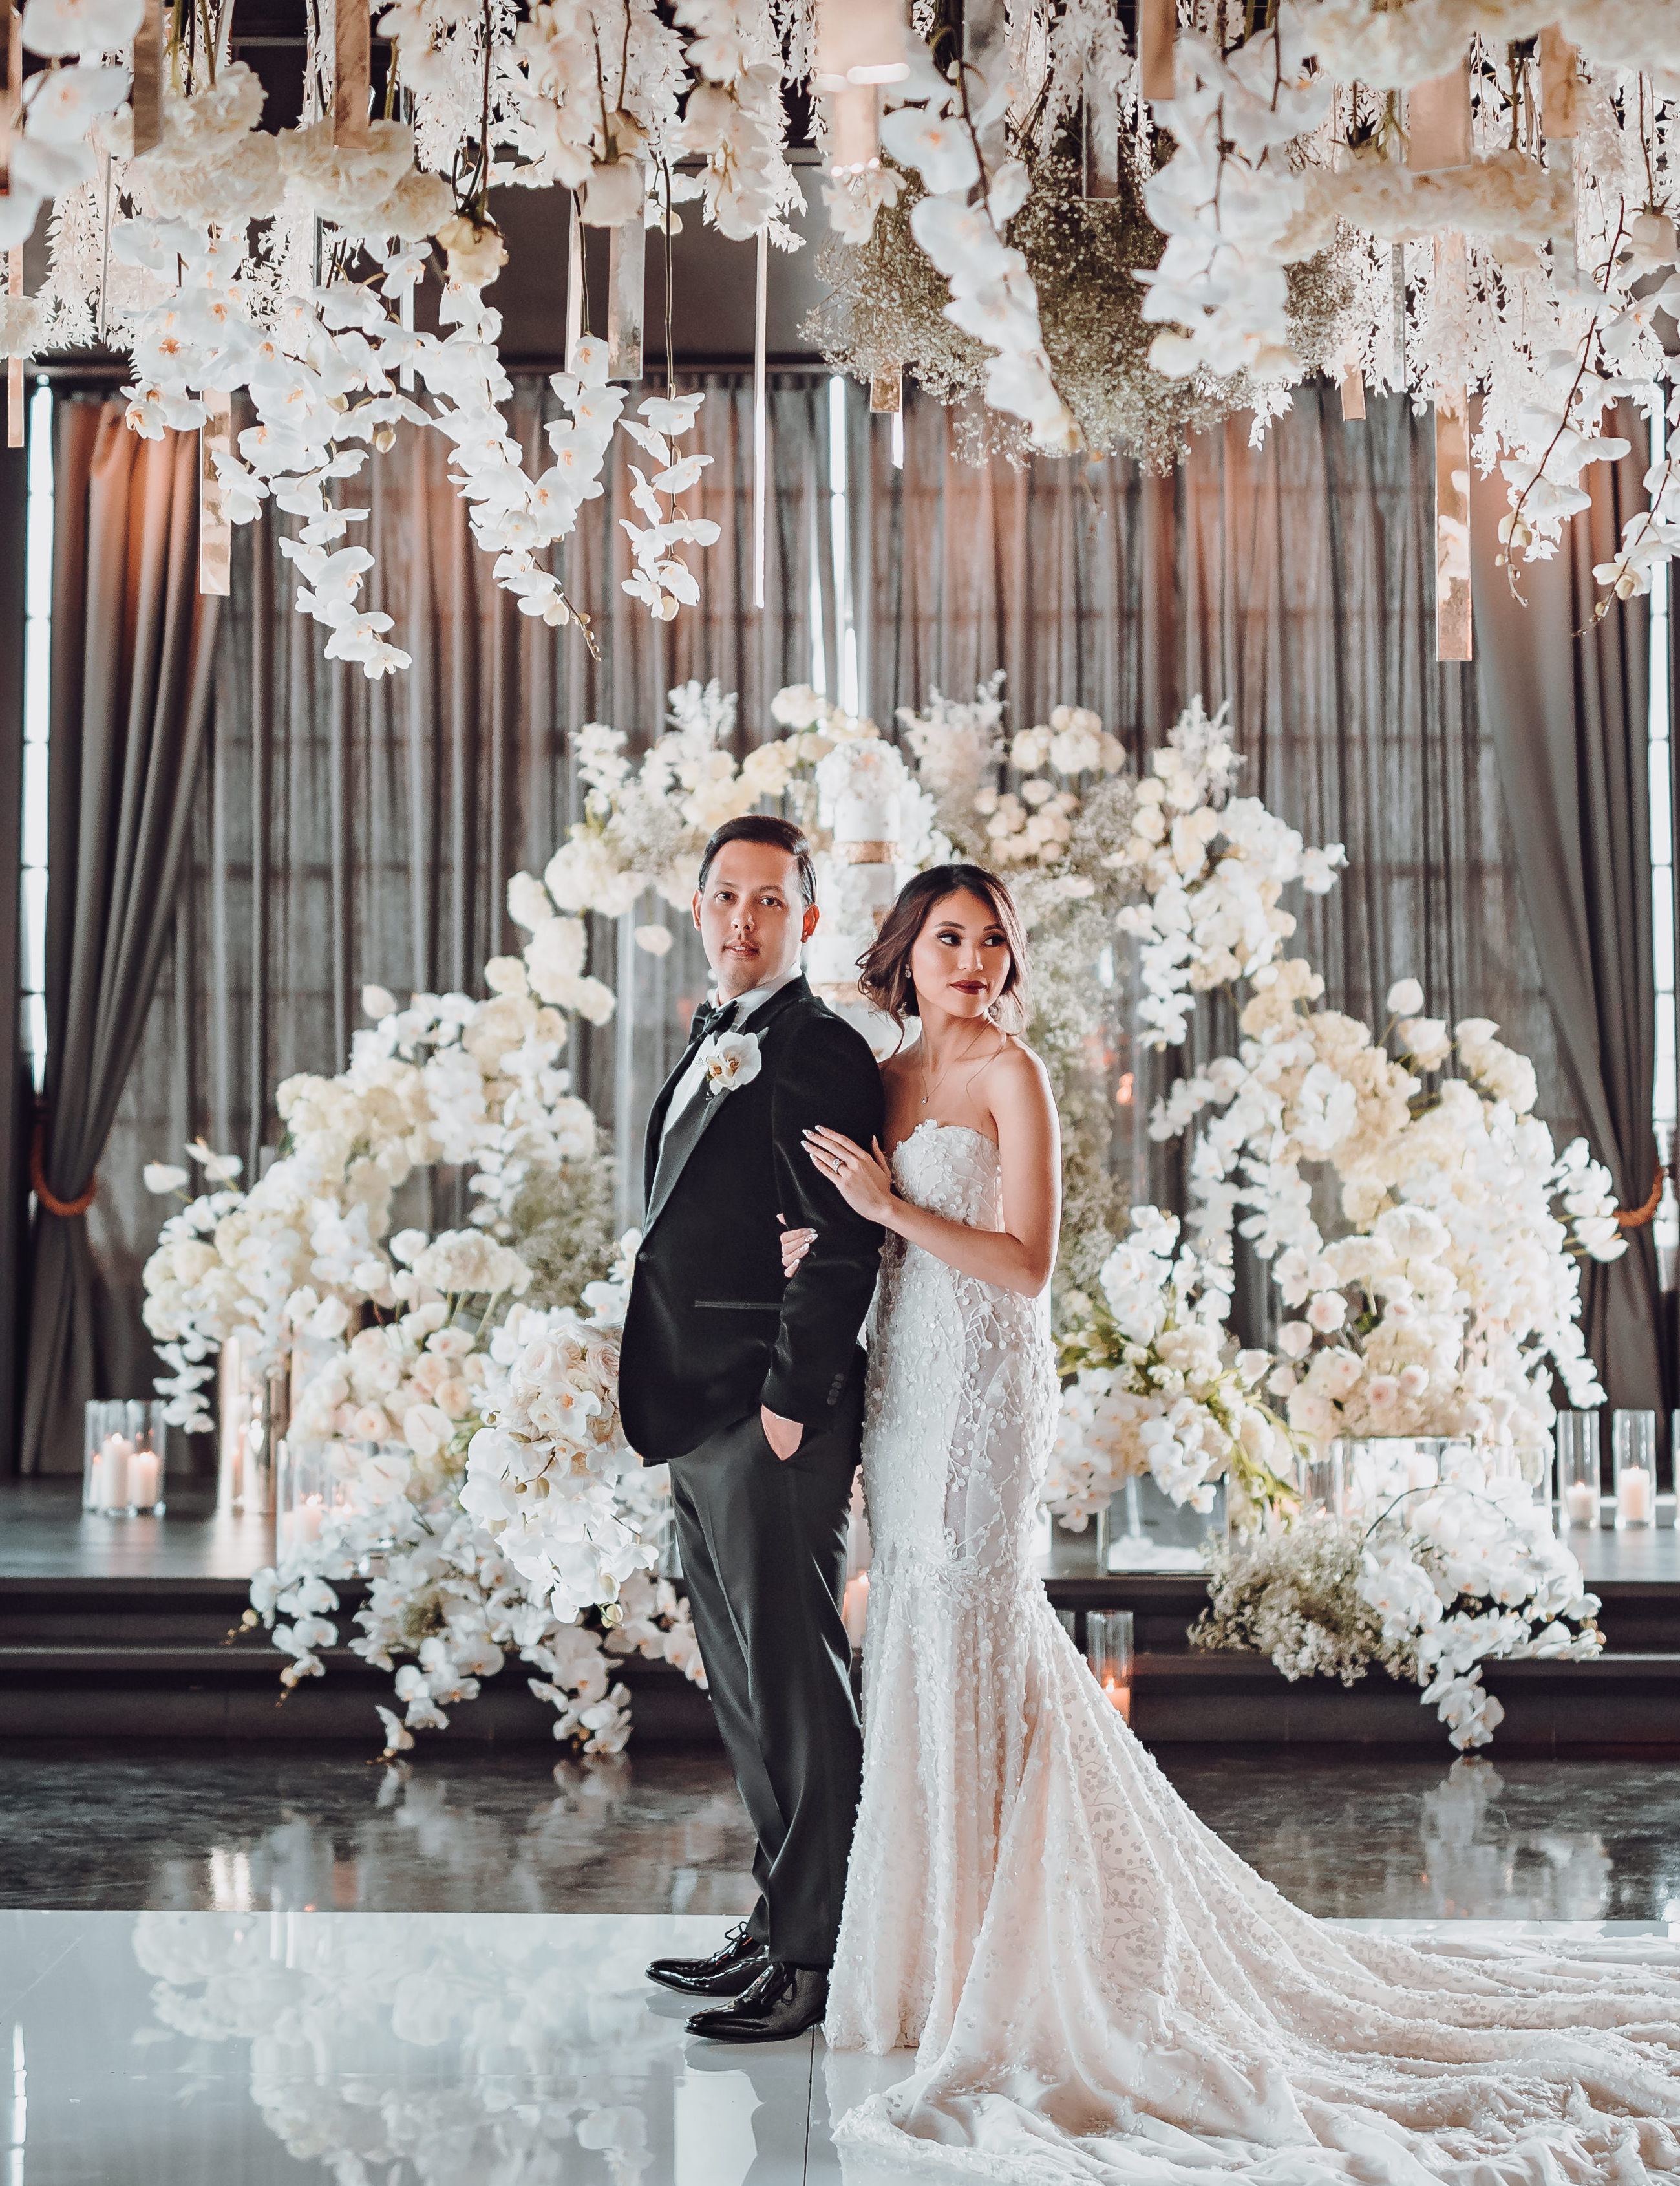 A groom in a black tuxedo stands with a bride in a Galia Lahav wedding gown in the Astorian's ballroom, decorated with white floral installations and lit candles.